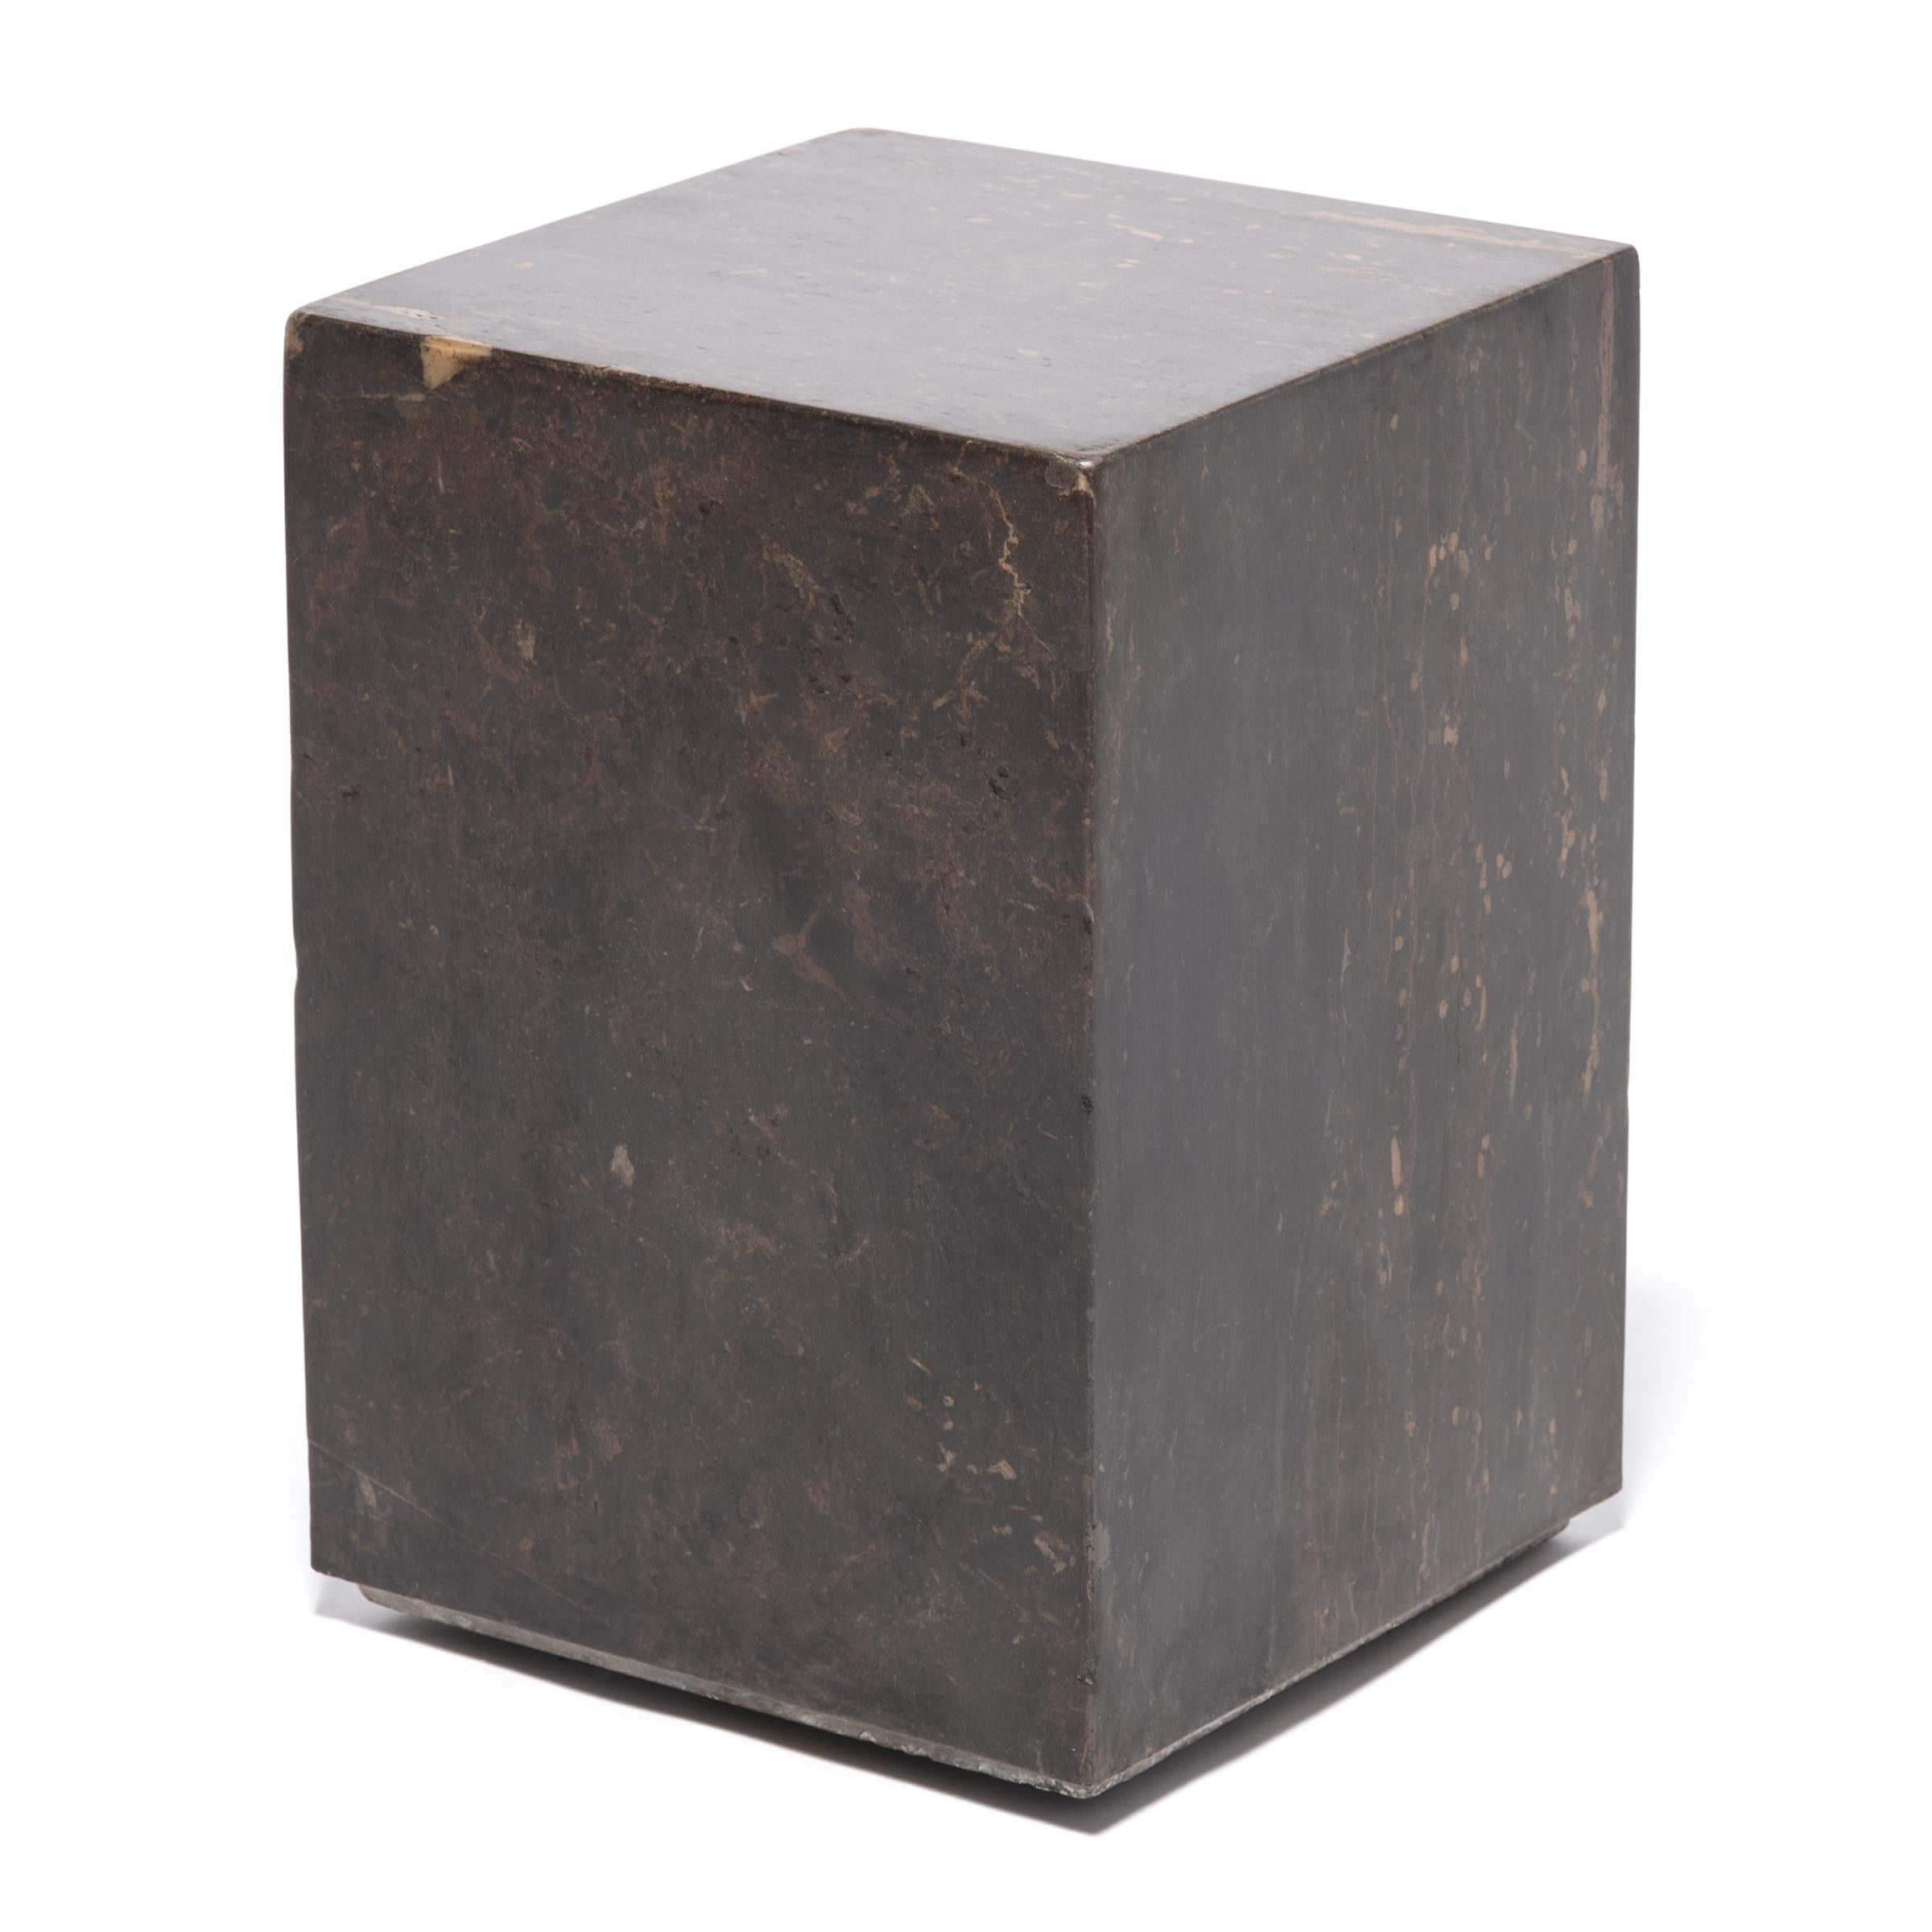 The design of this contemporary doon table makes its solid marble form appear to float off the ground. Hand-carved into a marble block, the base has a graceful reveal, giving the stone a modern lightness. The table's rich, dark color is swirled with